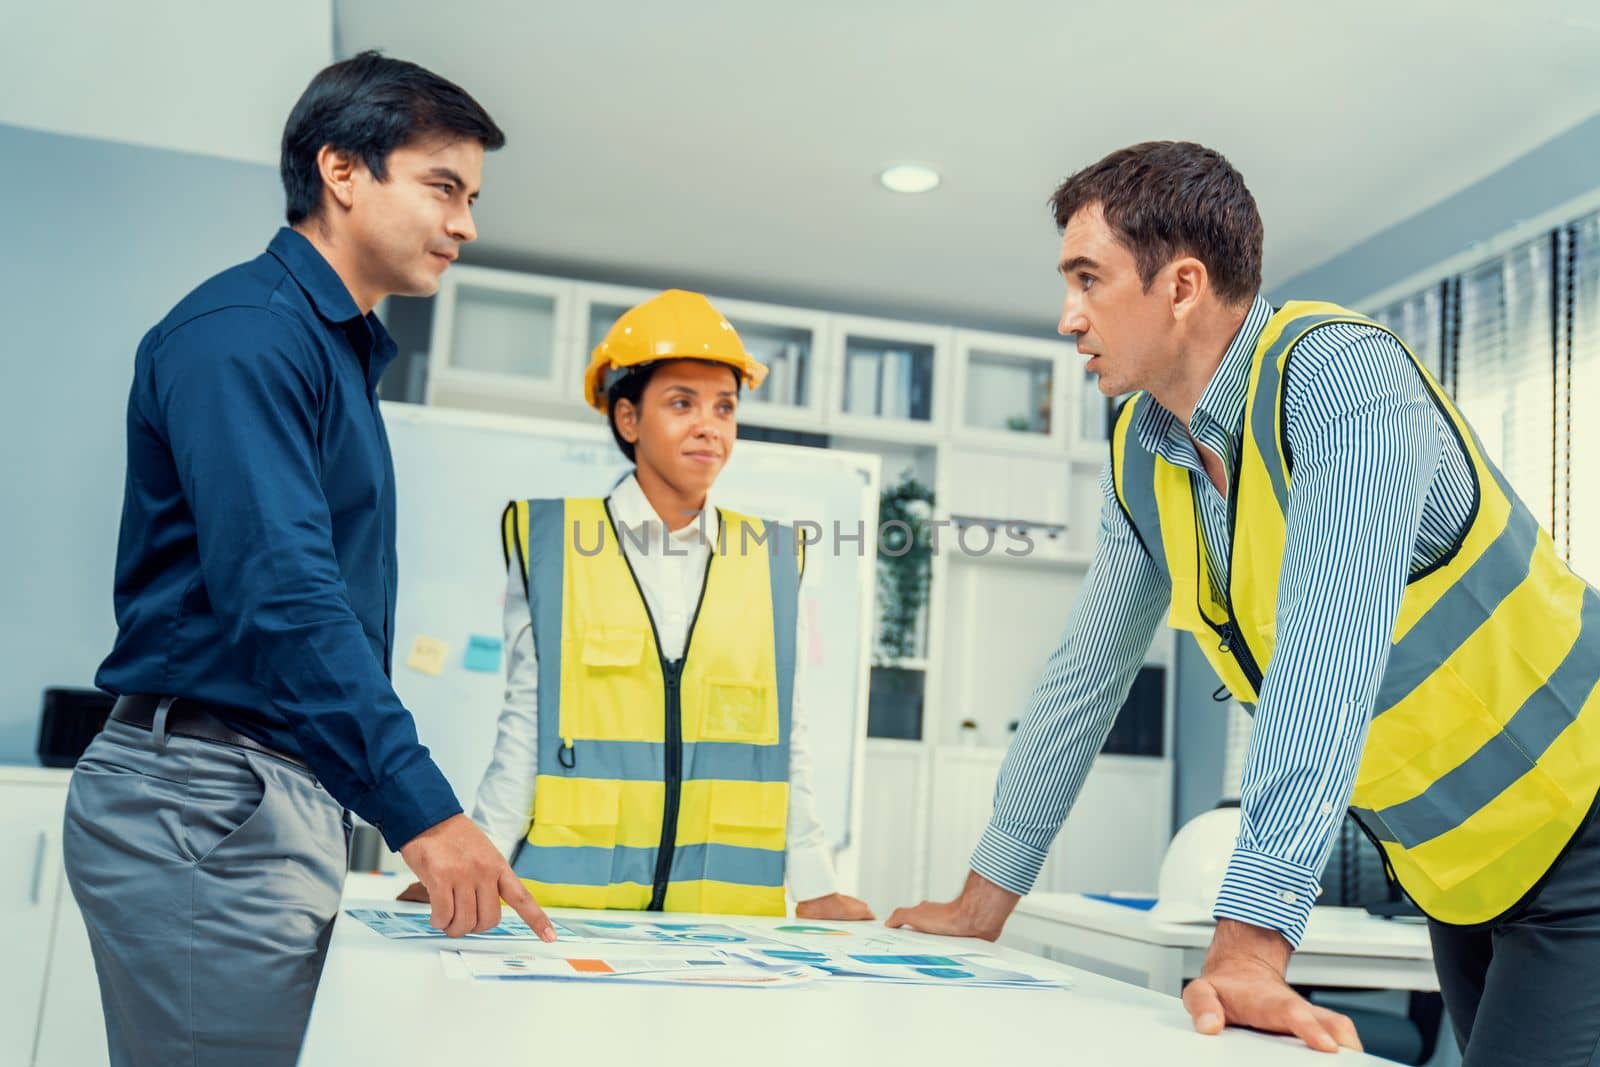 A group of competent engineers and employer discuss plans in the office. Architectural investor, businessman, and engineer discussing blueprints.